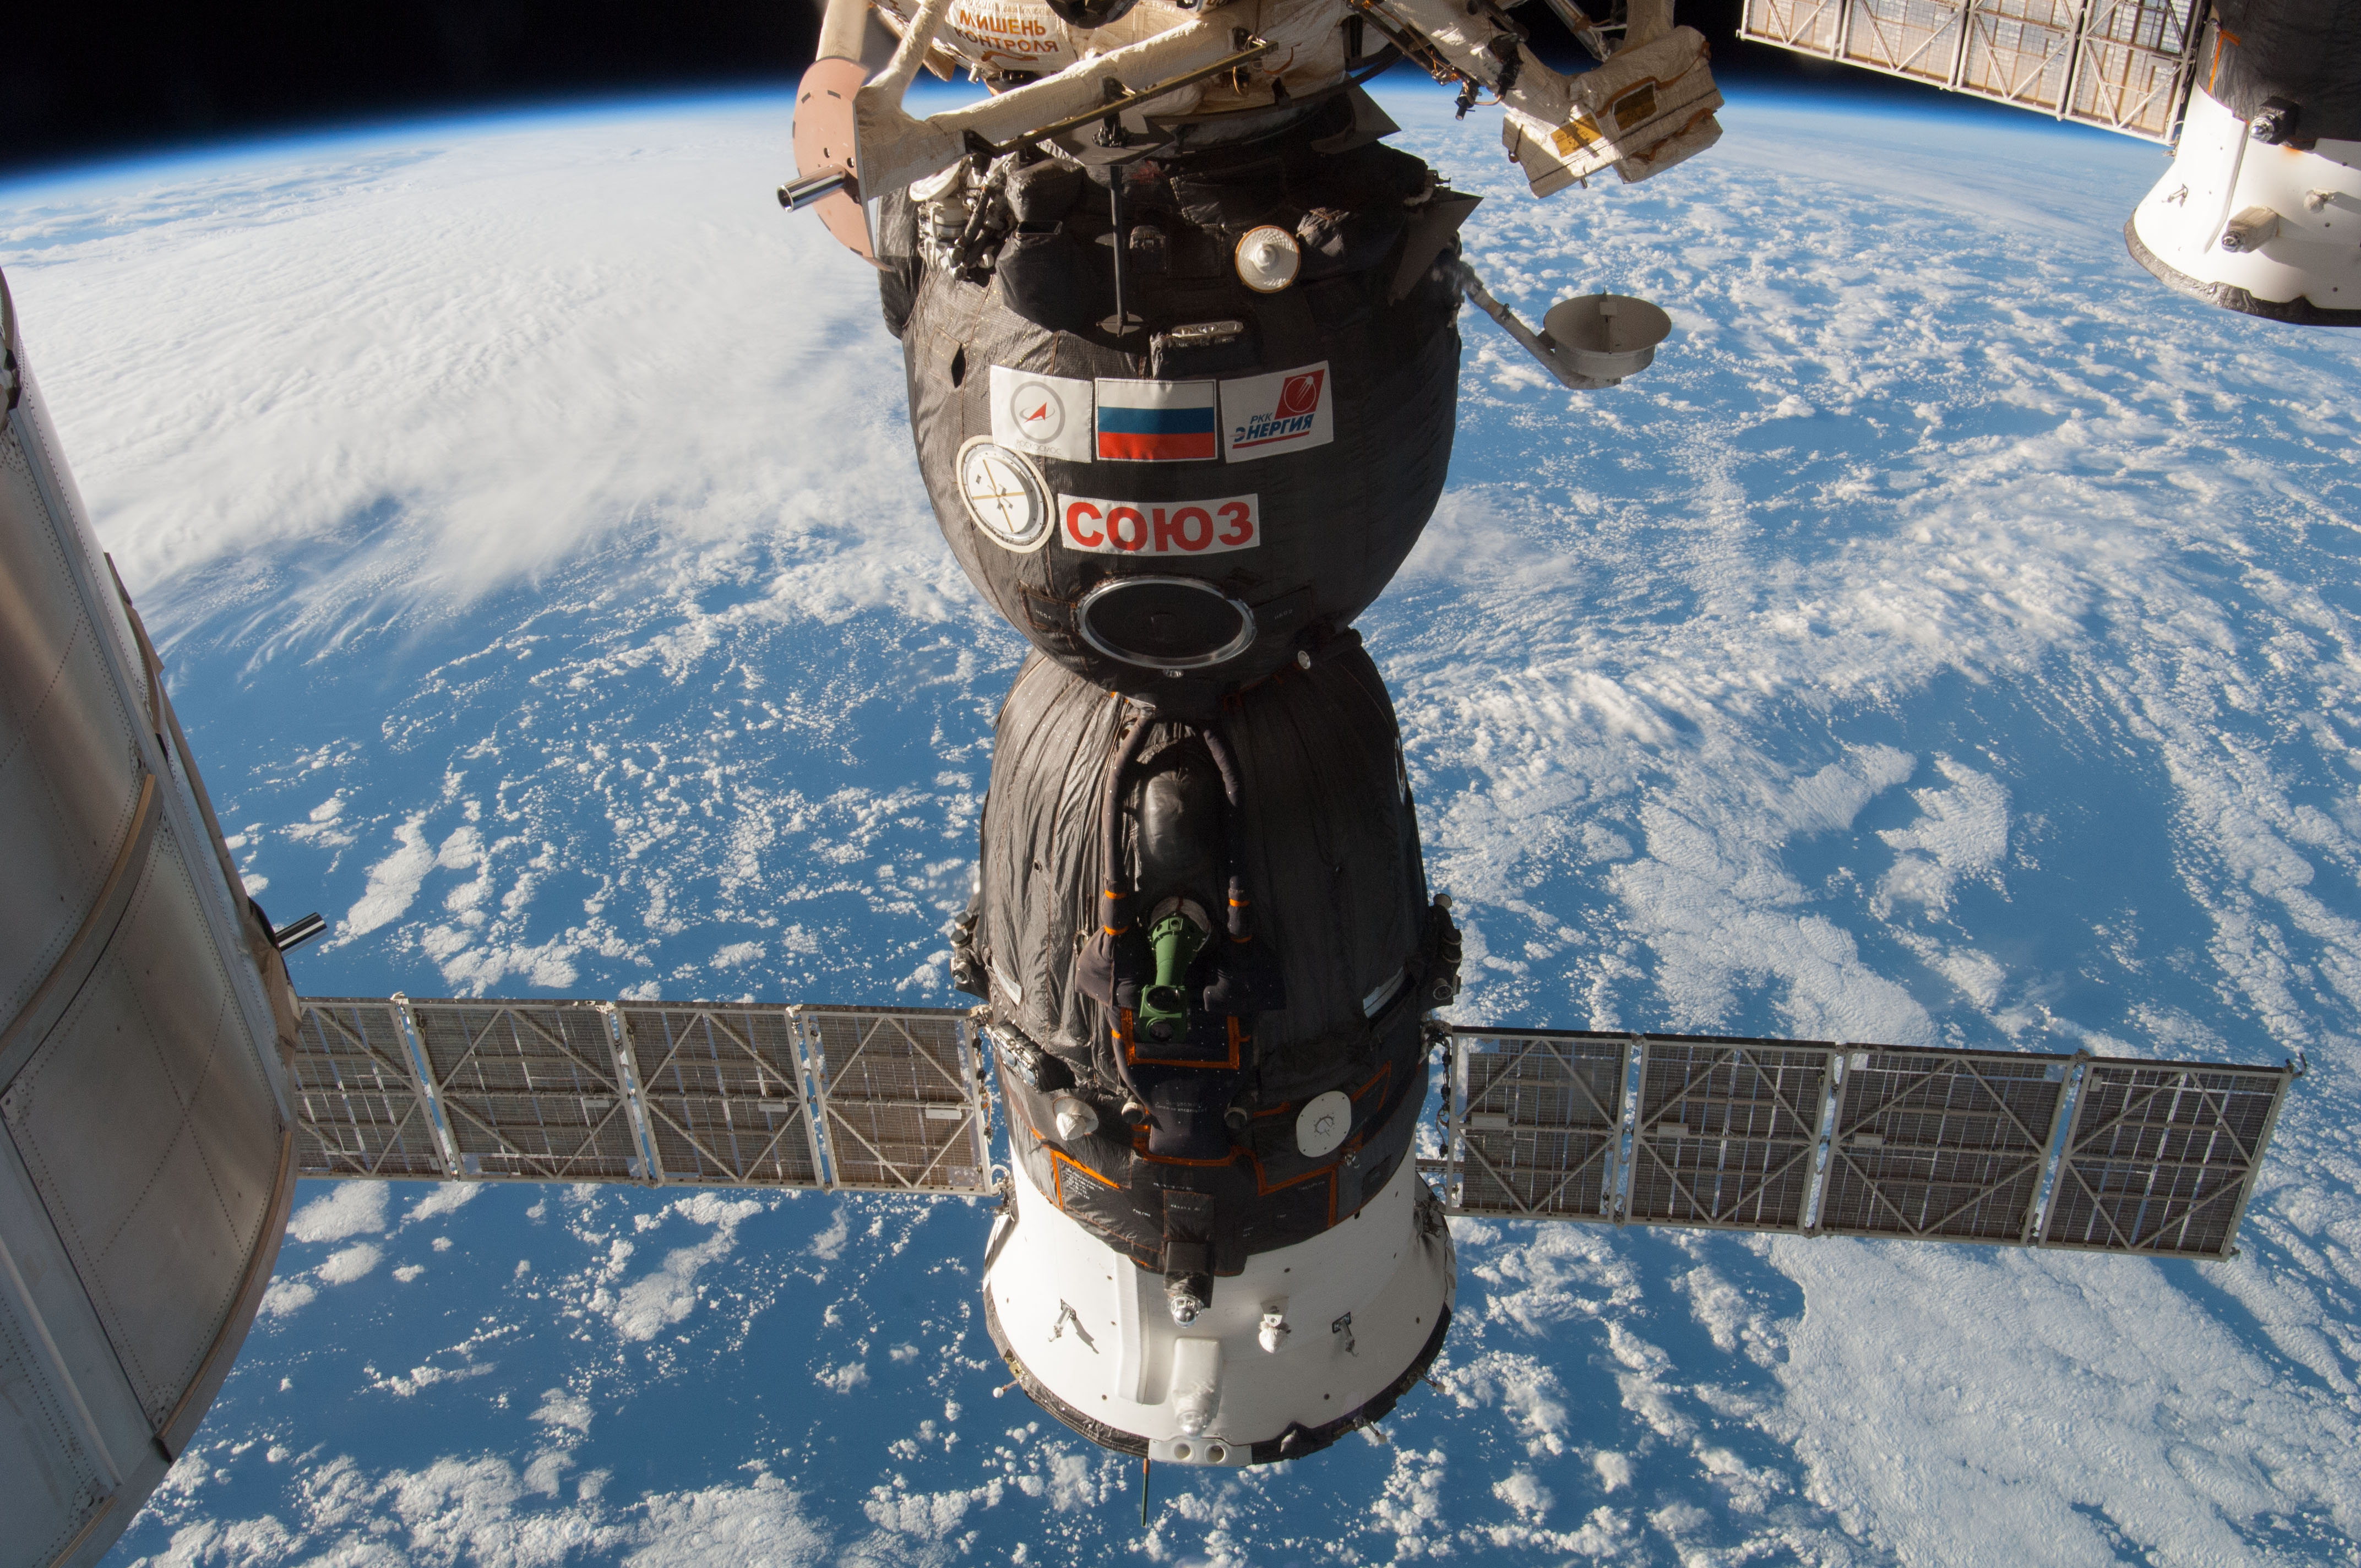 Science News Roundup: Russian Soyuz blasts off for ISS; Scientists to redefine value of kilogram